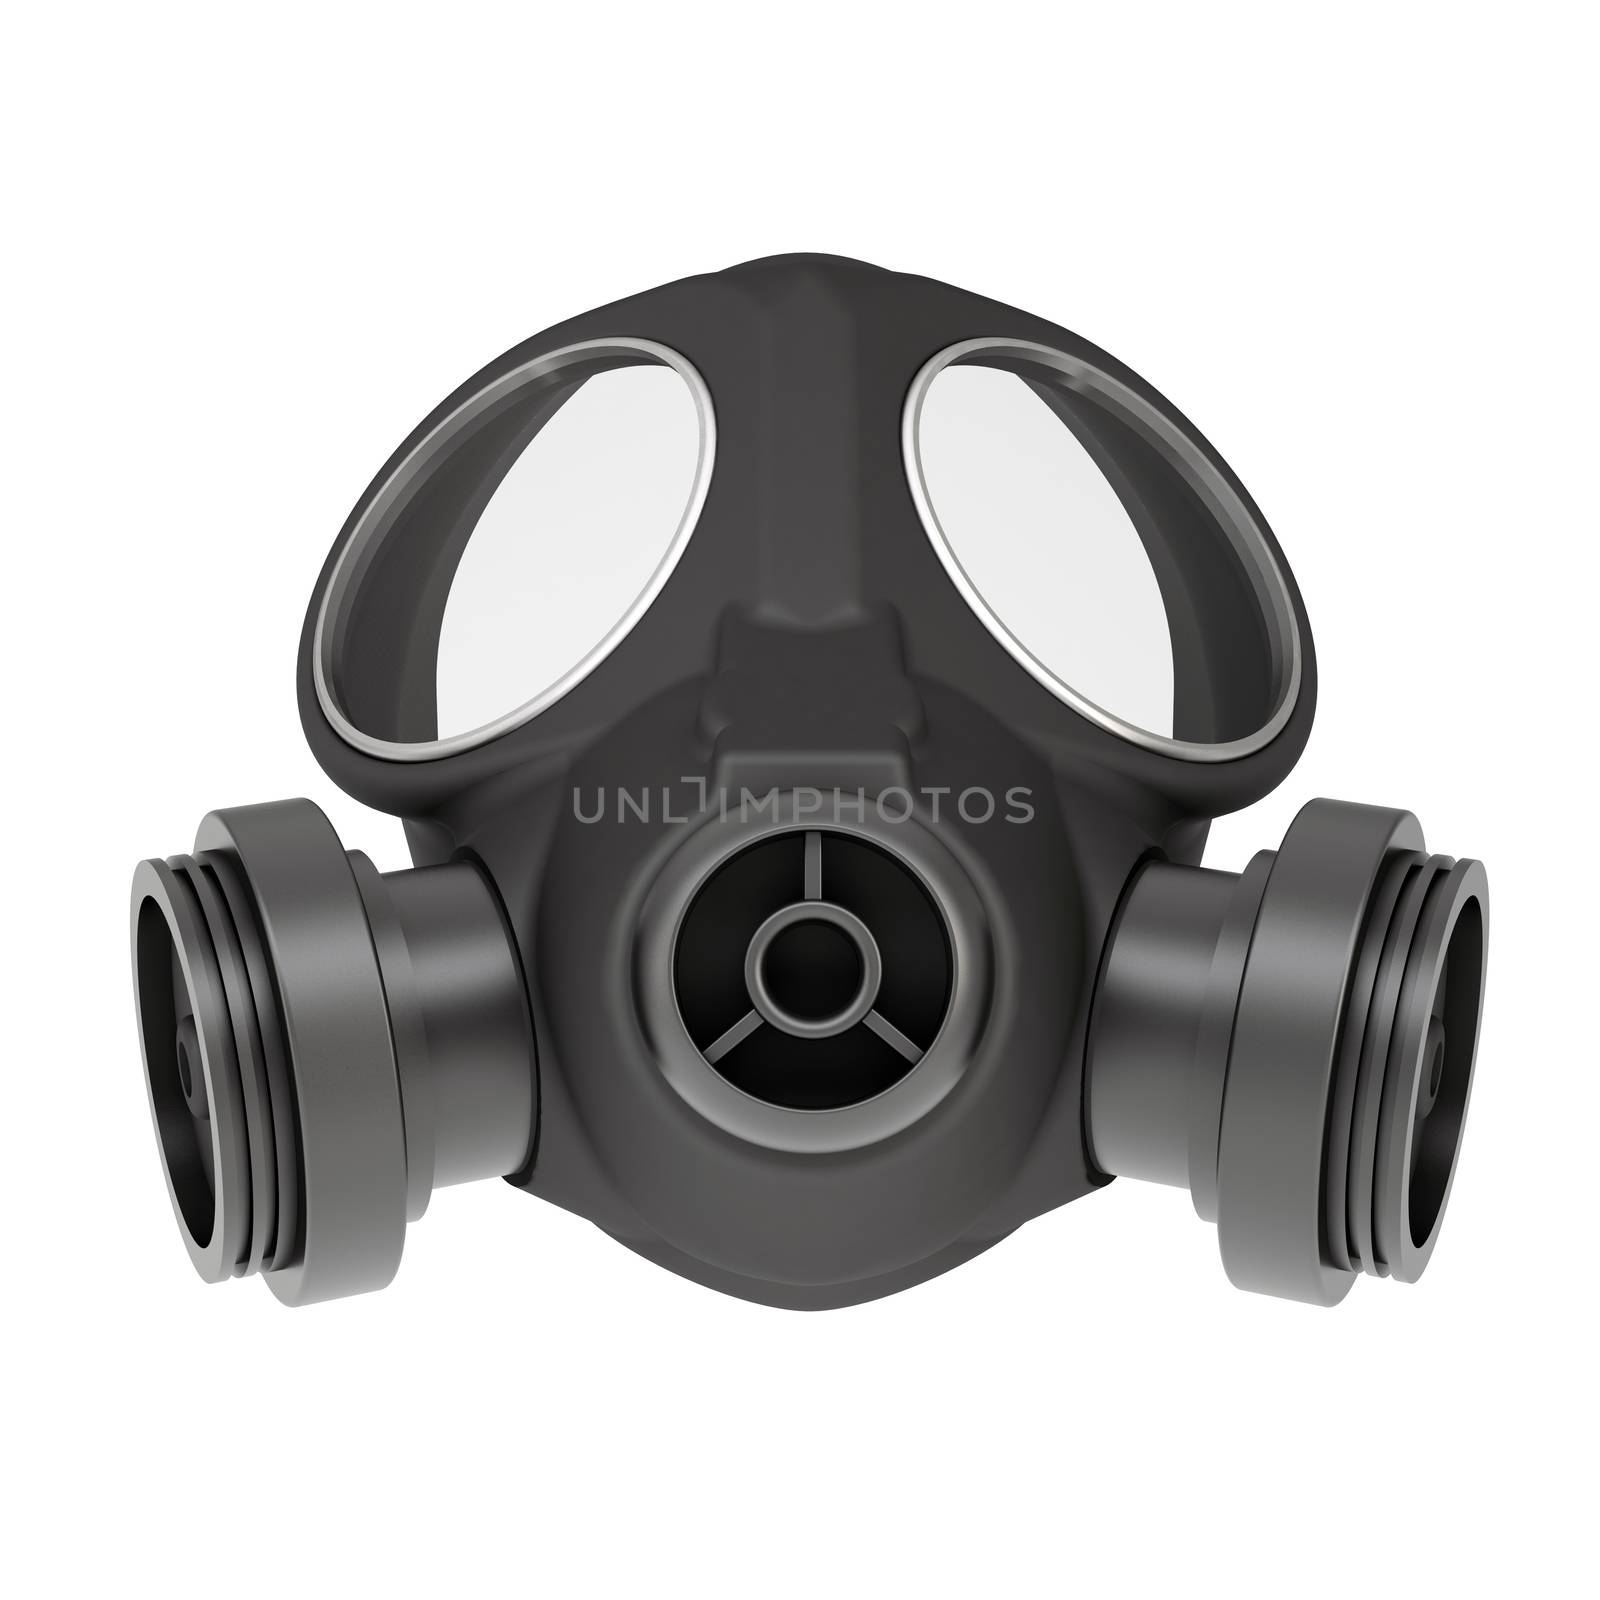 Gas mask. Isolated render on a white background